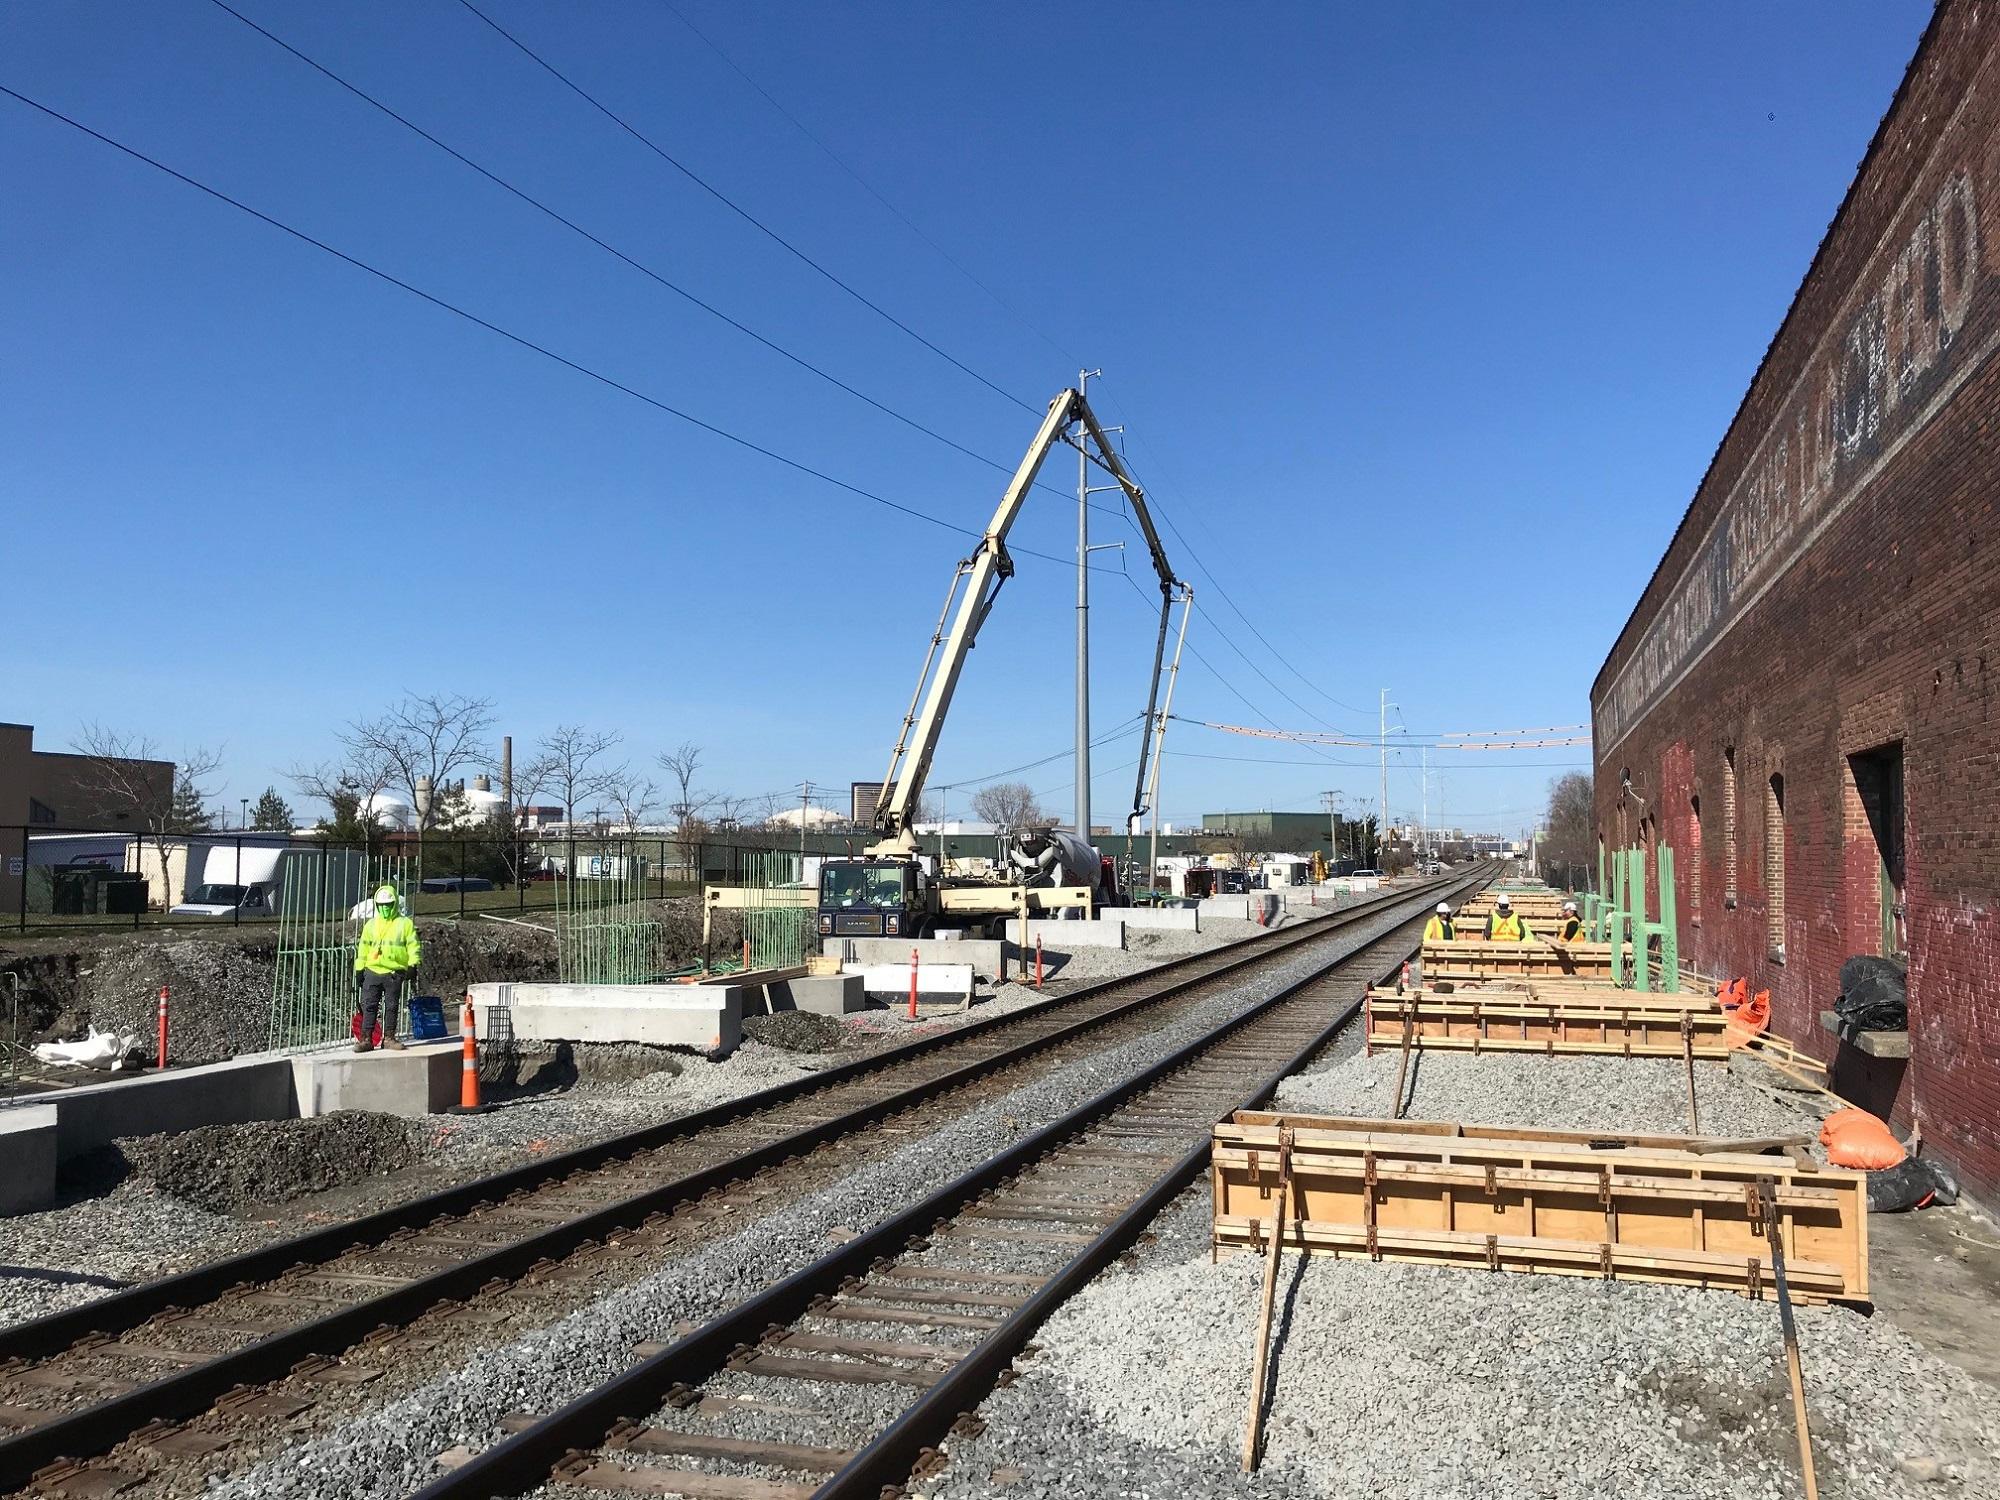 Crew members place concrete for Track 2 pile caps and canopy bases at Chelsea Commuter Rail Station, April 2020